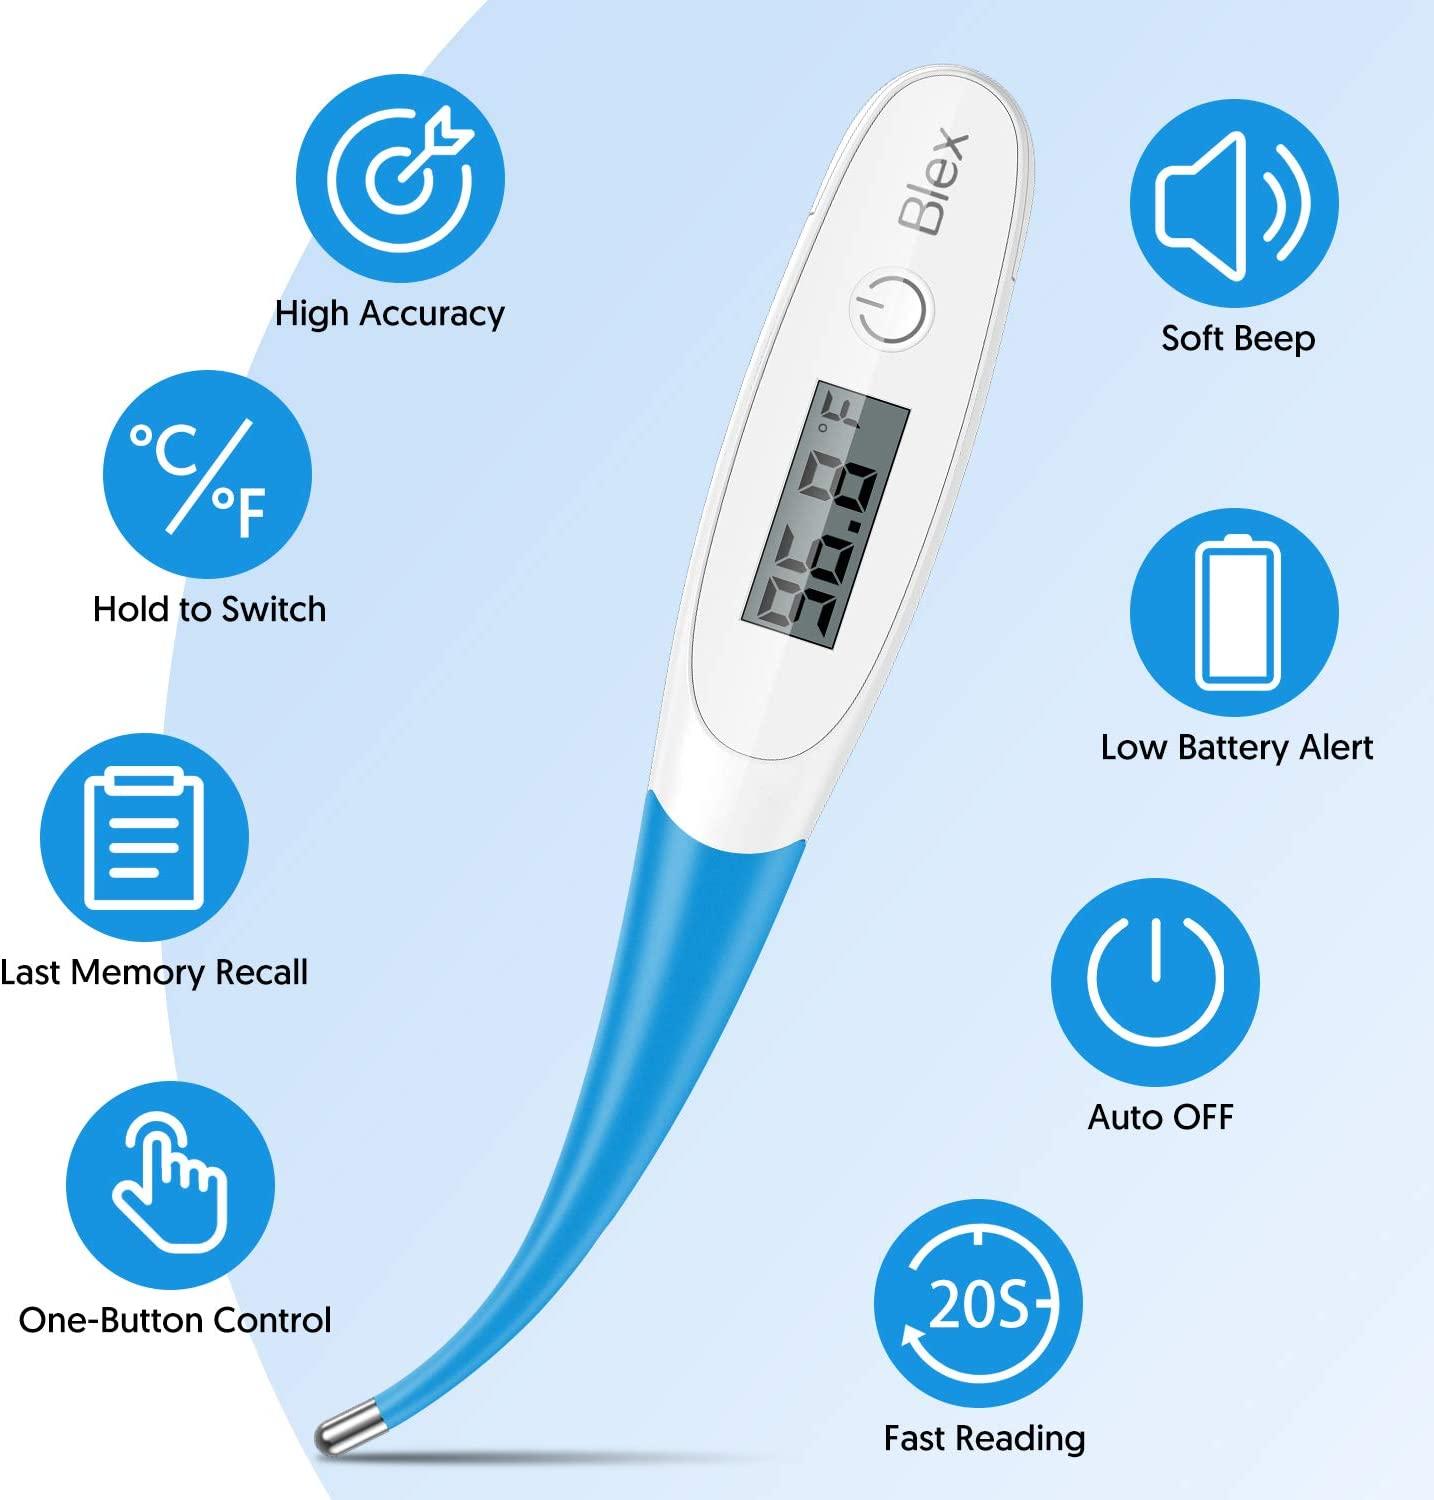 Thermometer for Adults and Kids, Digital Oral Thermometer with 10